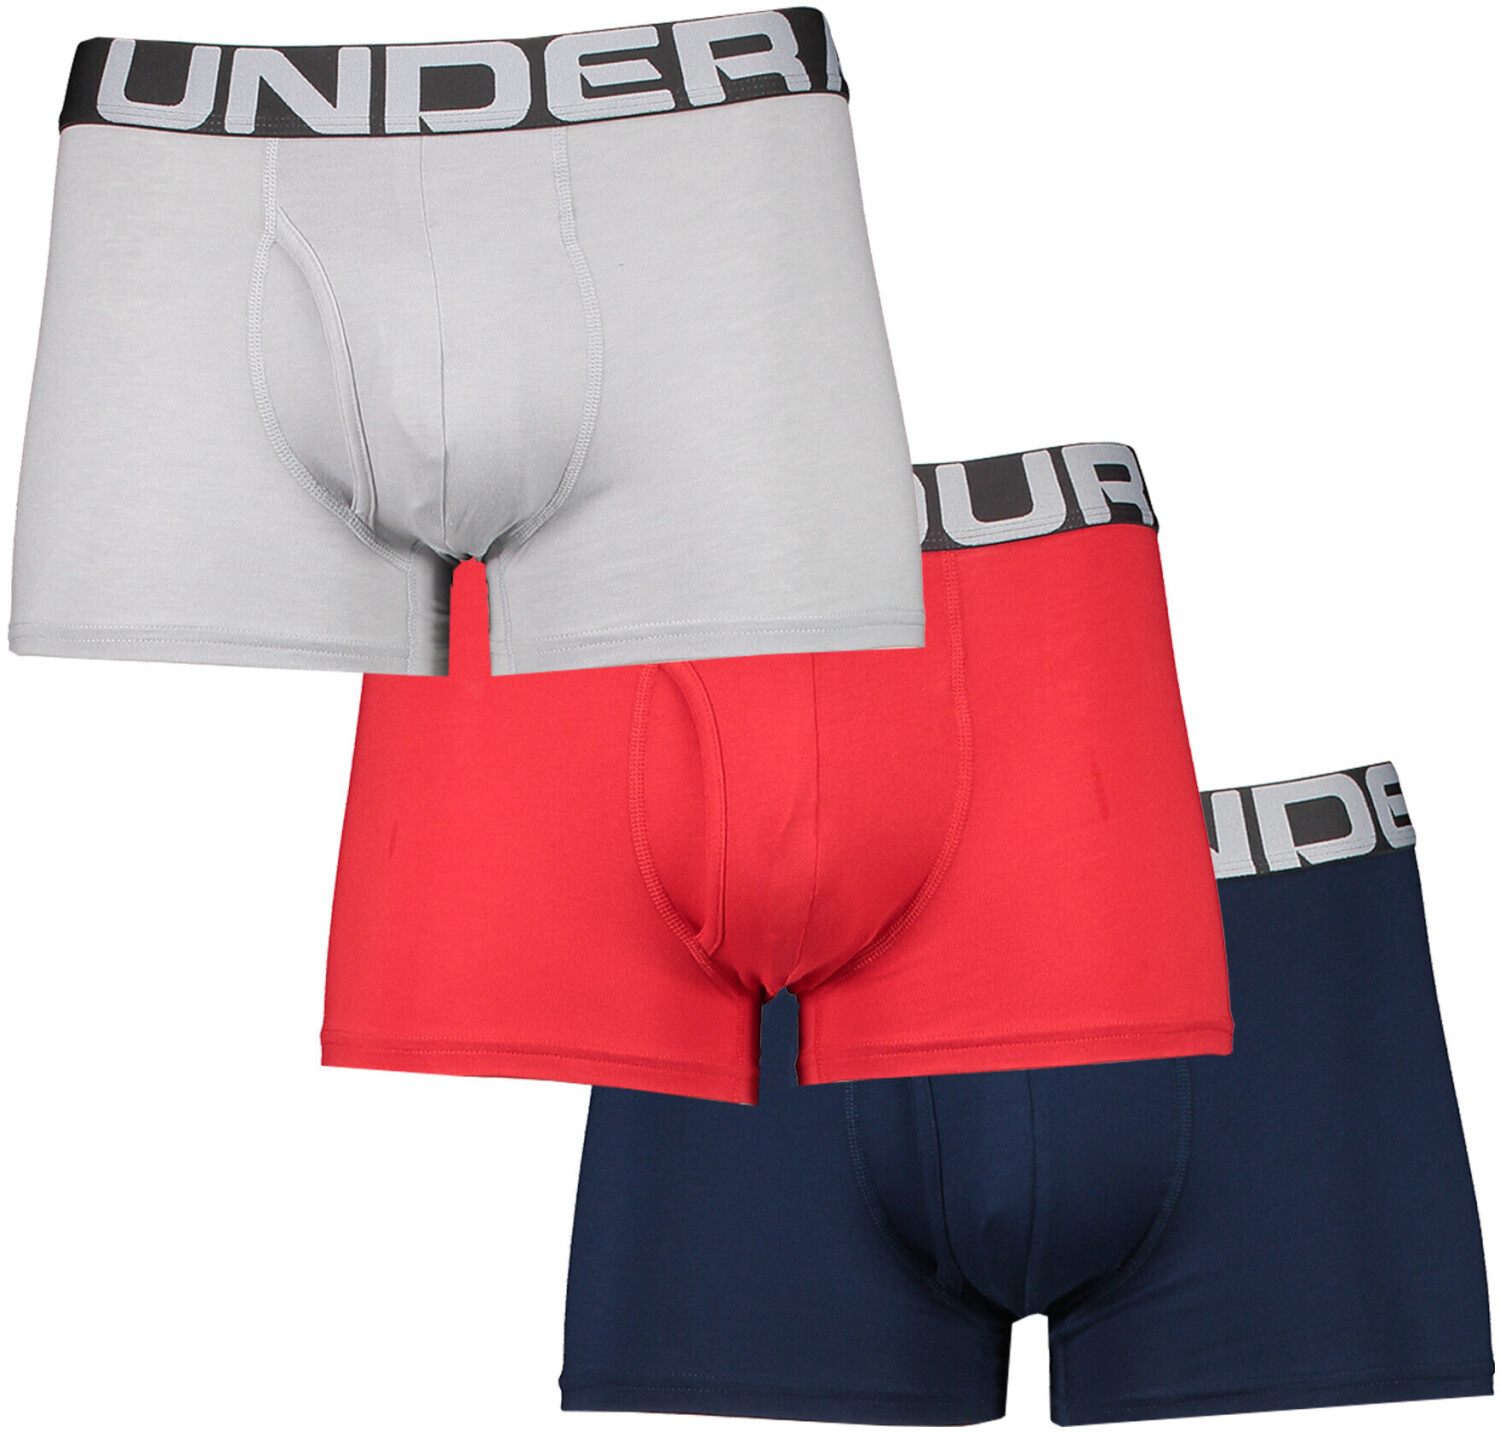 Buy Under Armour Charged Cotton Boxerjock (7,5 cm) 3-Pack (1363616) from  £25.99 (Today) – Best Deals on